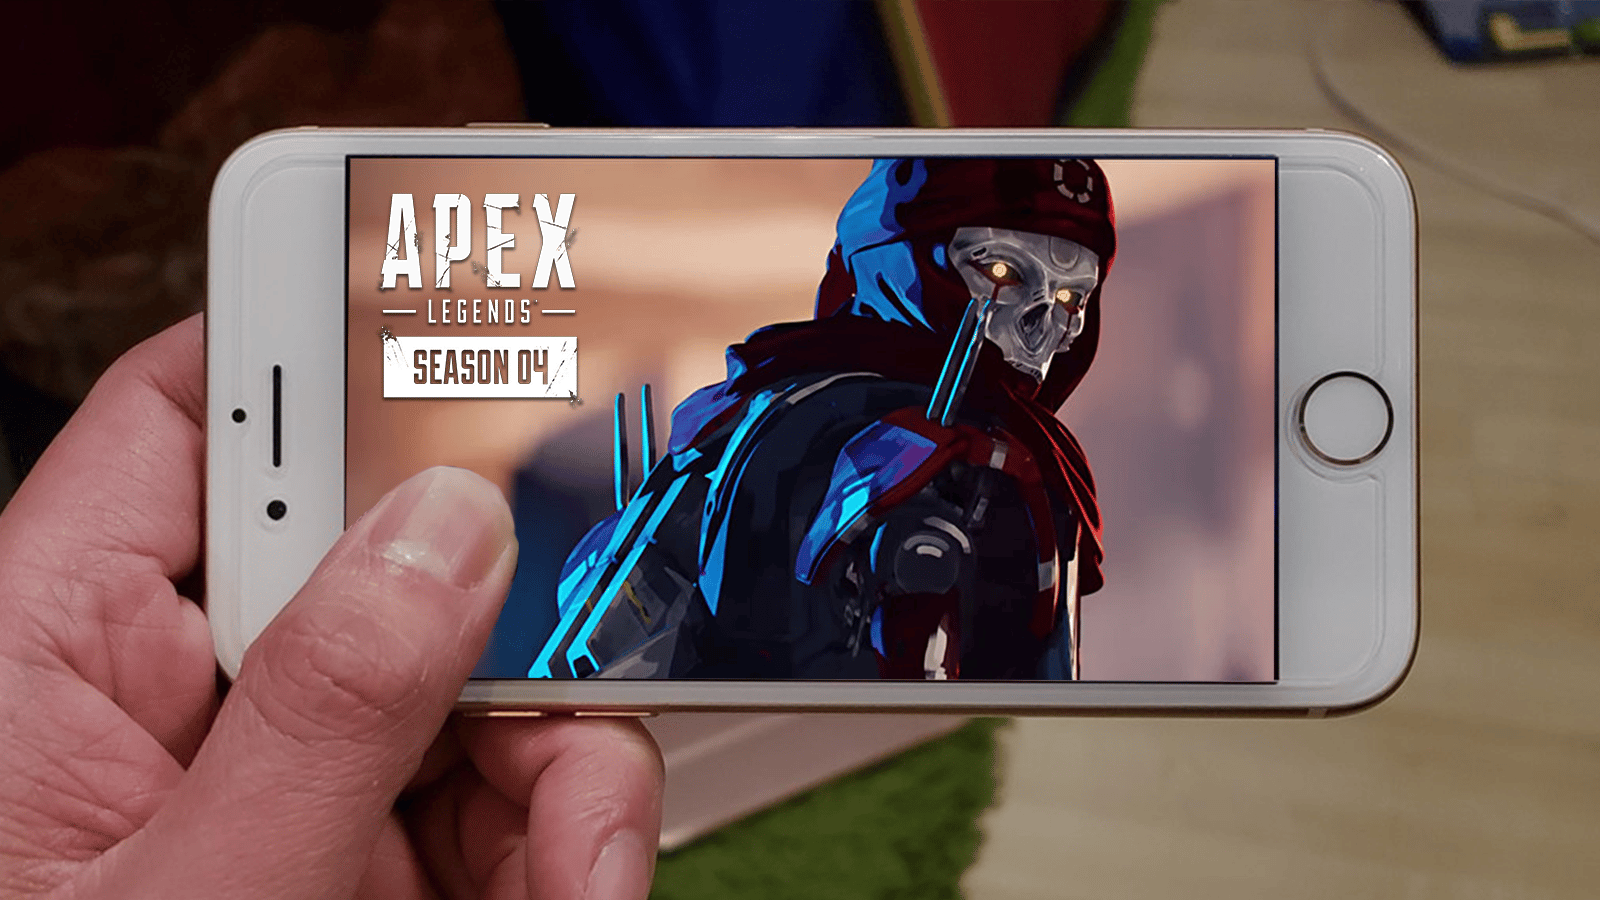 While it looks like Apex's next-gen future is locked, there's been limited news on the game's upcoming mobile release.